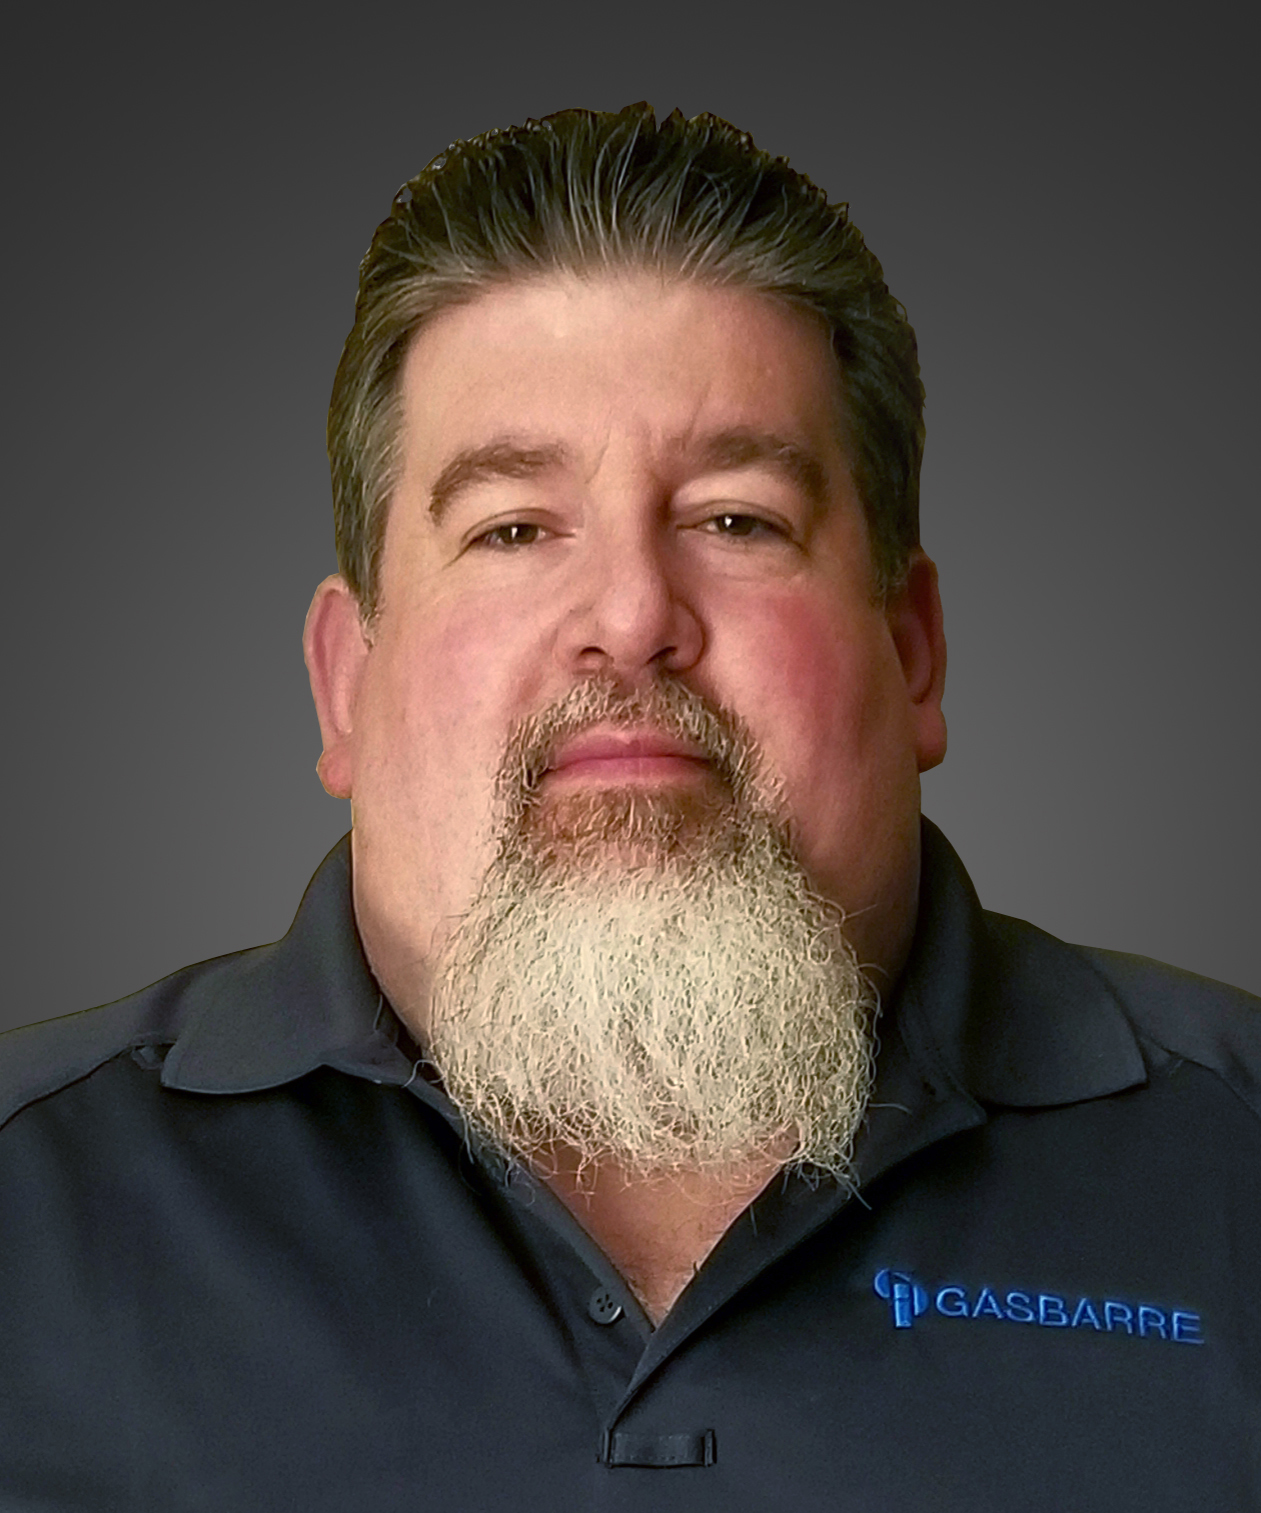 Gasbarre Industrial Furnace Systems has appointed Tom Spicer as a field service technician.